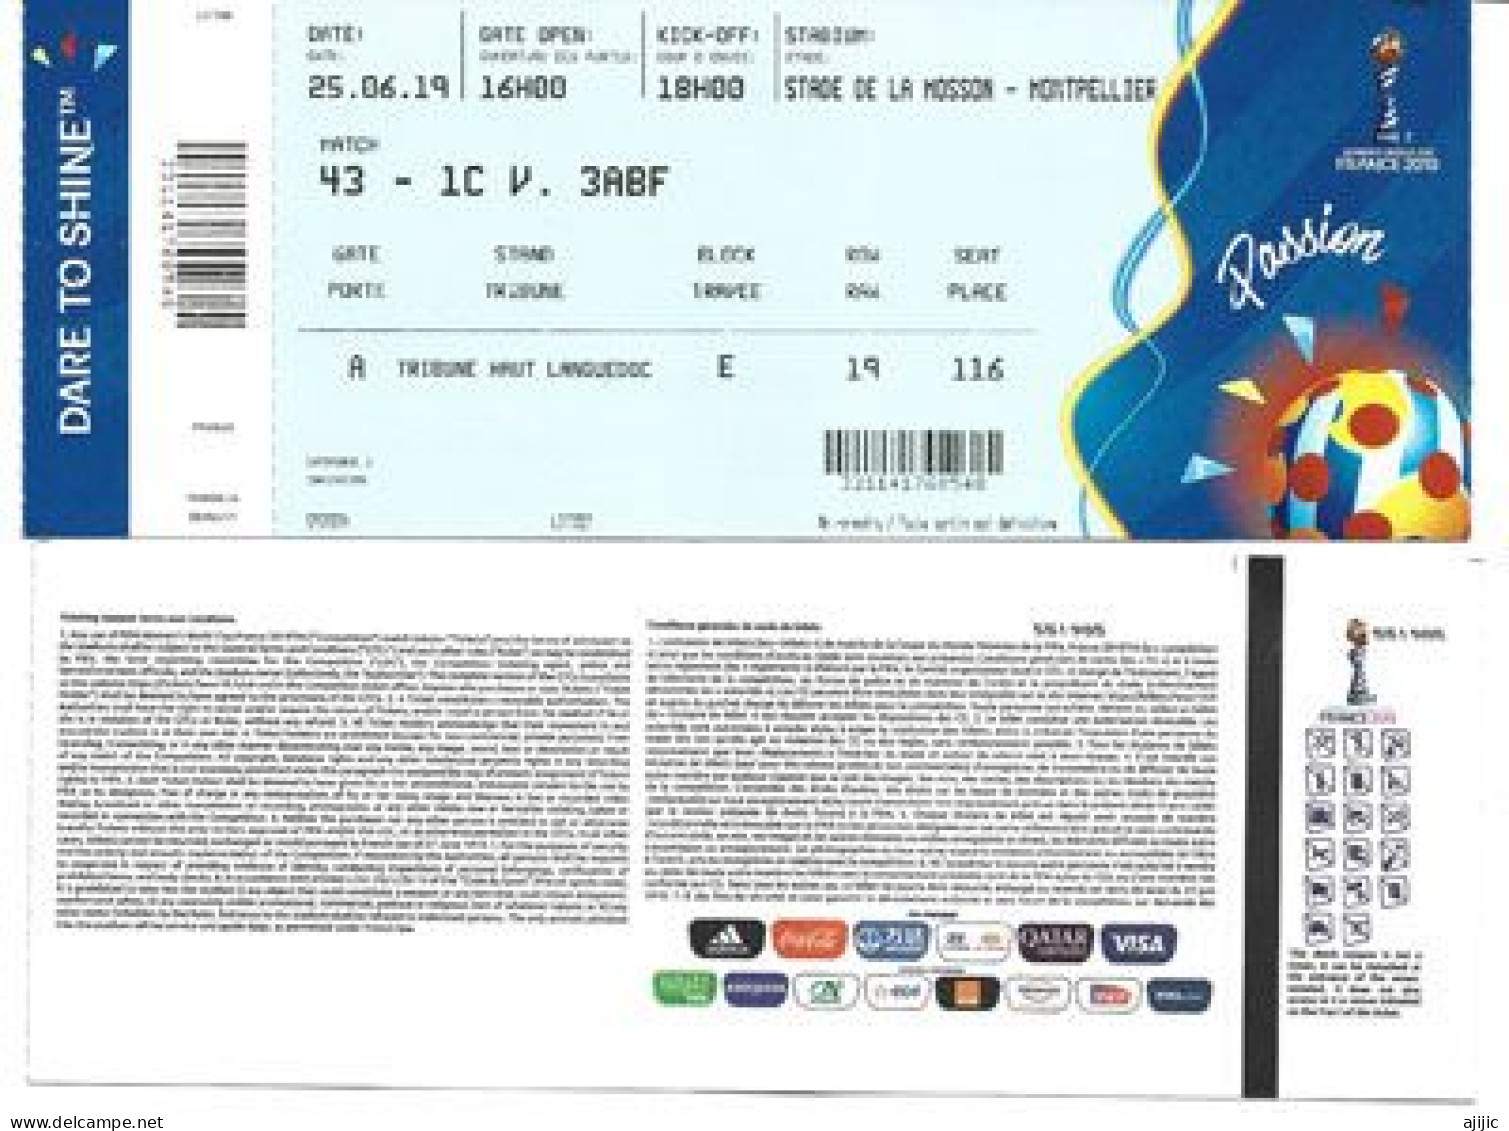 Italy V China PR | Round Of 16 | FIFA Women's World Cup France 2019 Montpellier. Entry Ticket - Tickets - Vouchers